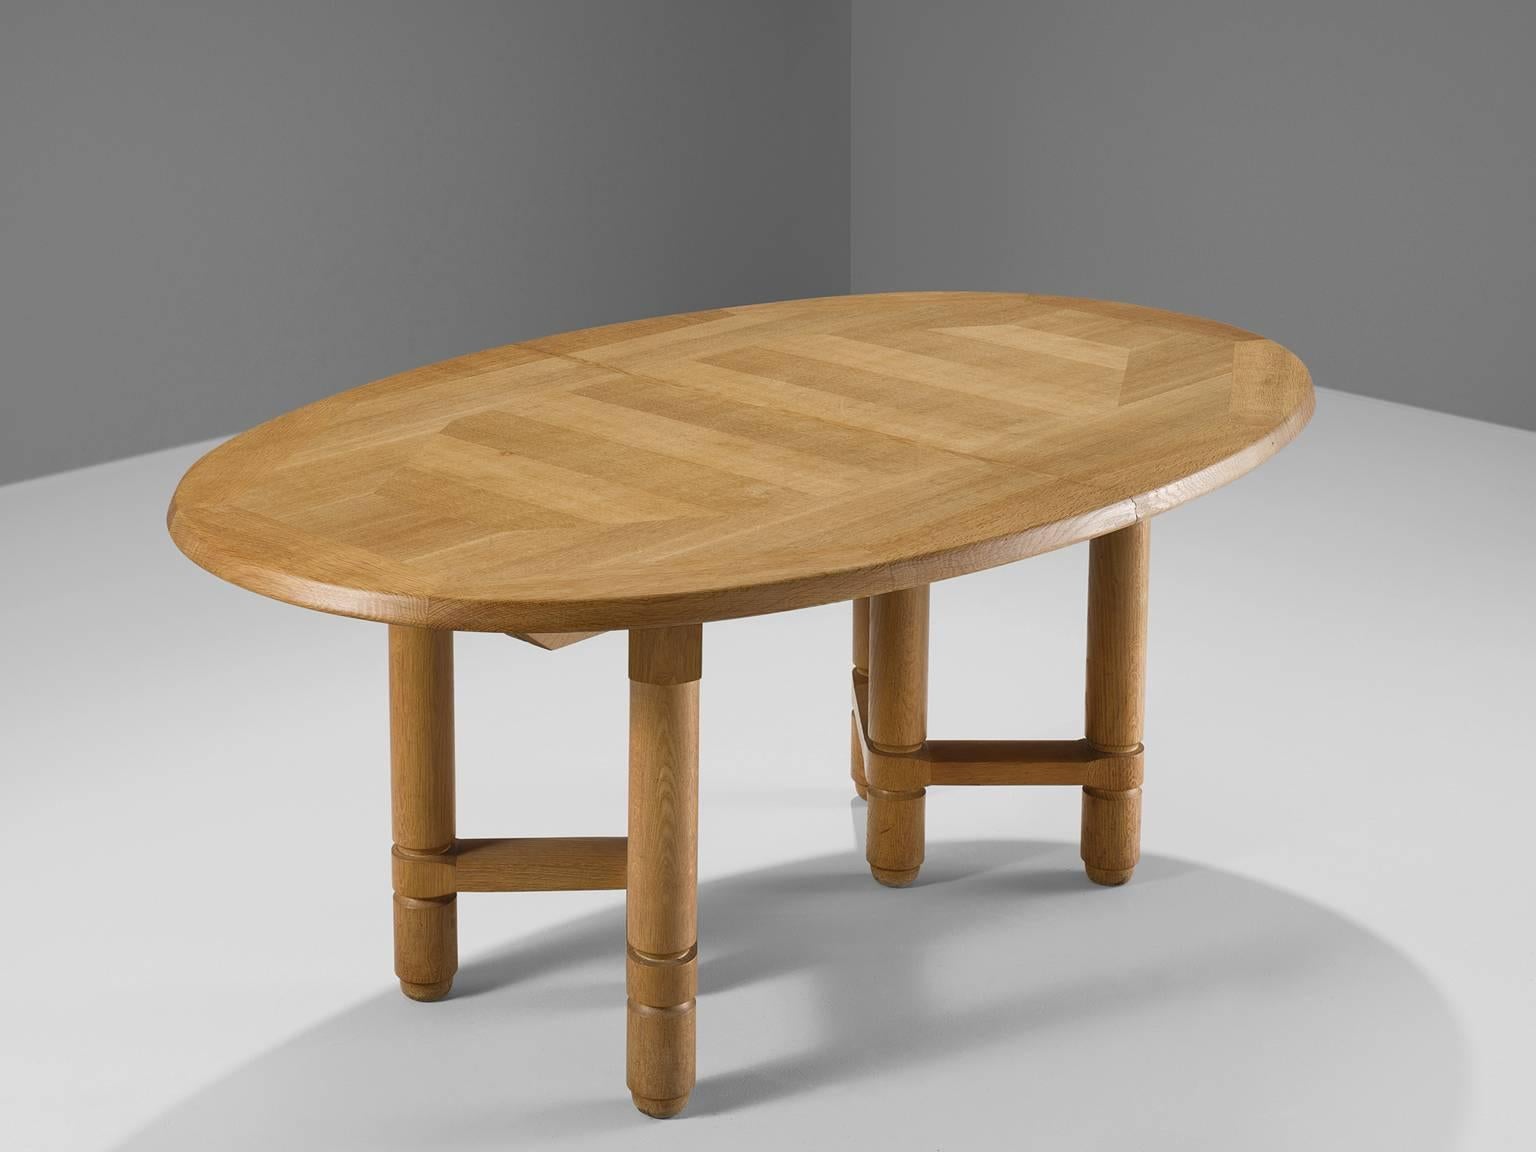 Dining table in oak, by Guillerme et Chambron for Votre Maison, France, 1960s.

Dining table in solid oak, with beautiful carved wooden decoration, designed by the French designer duo Guillerme and Chambron. The oval top features an inlay pattern.